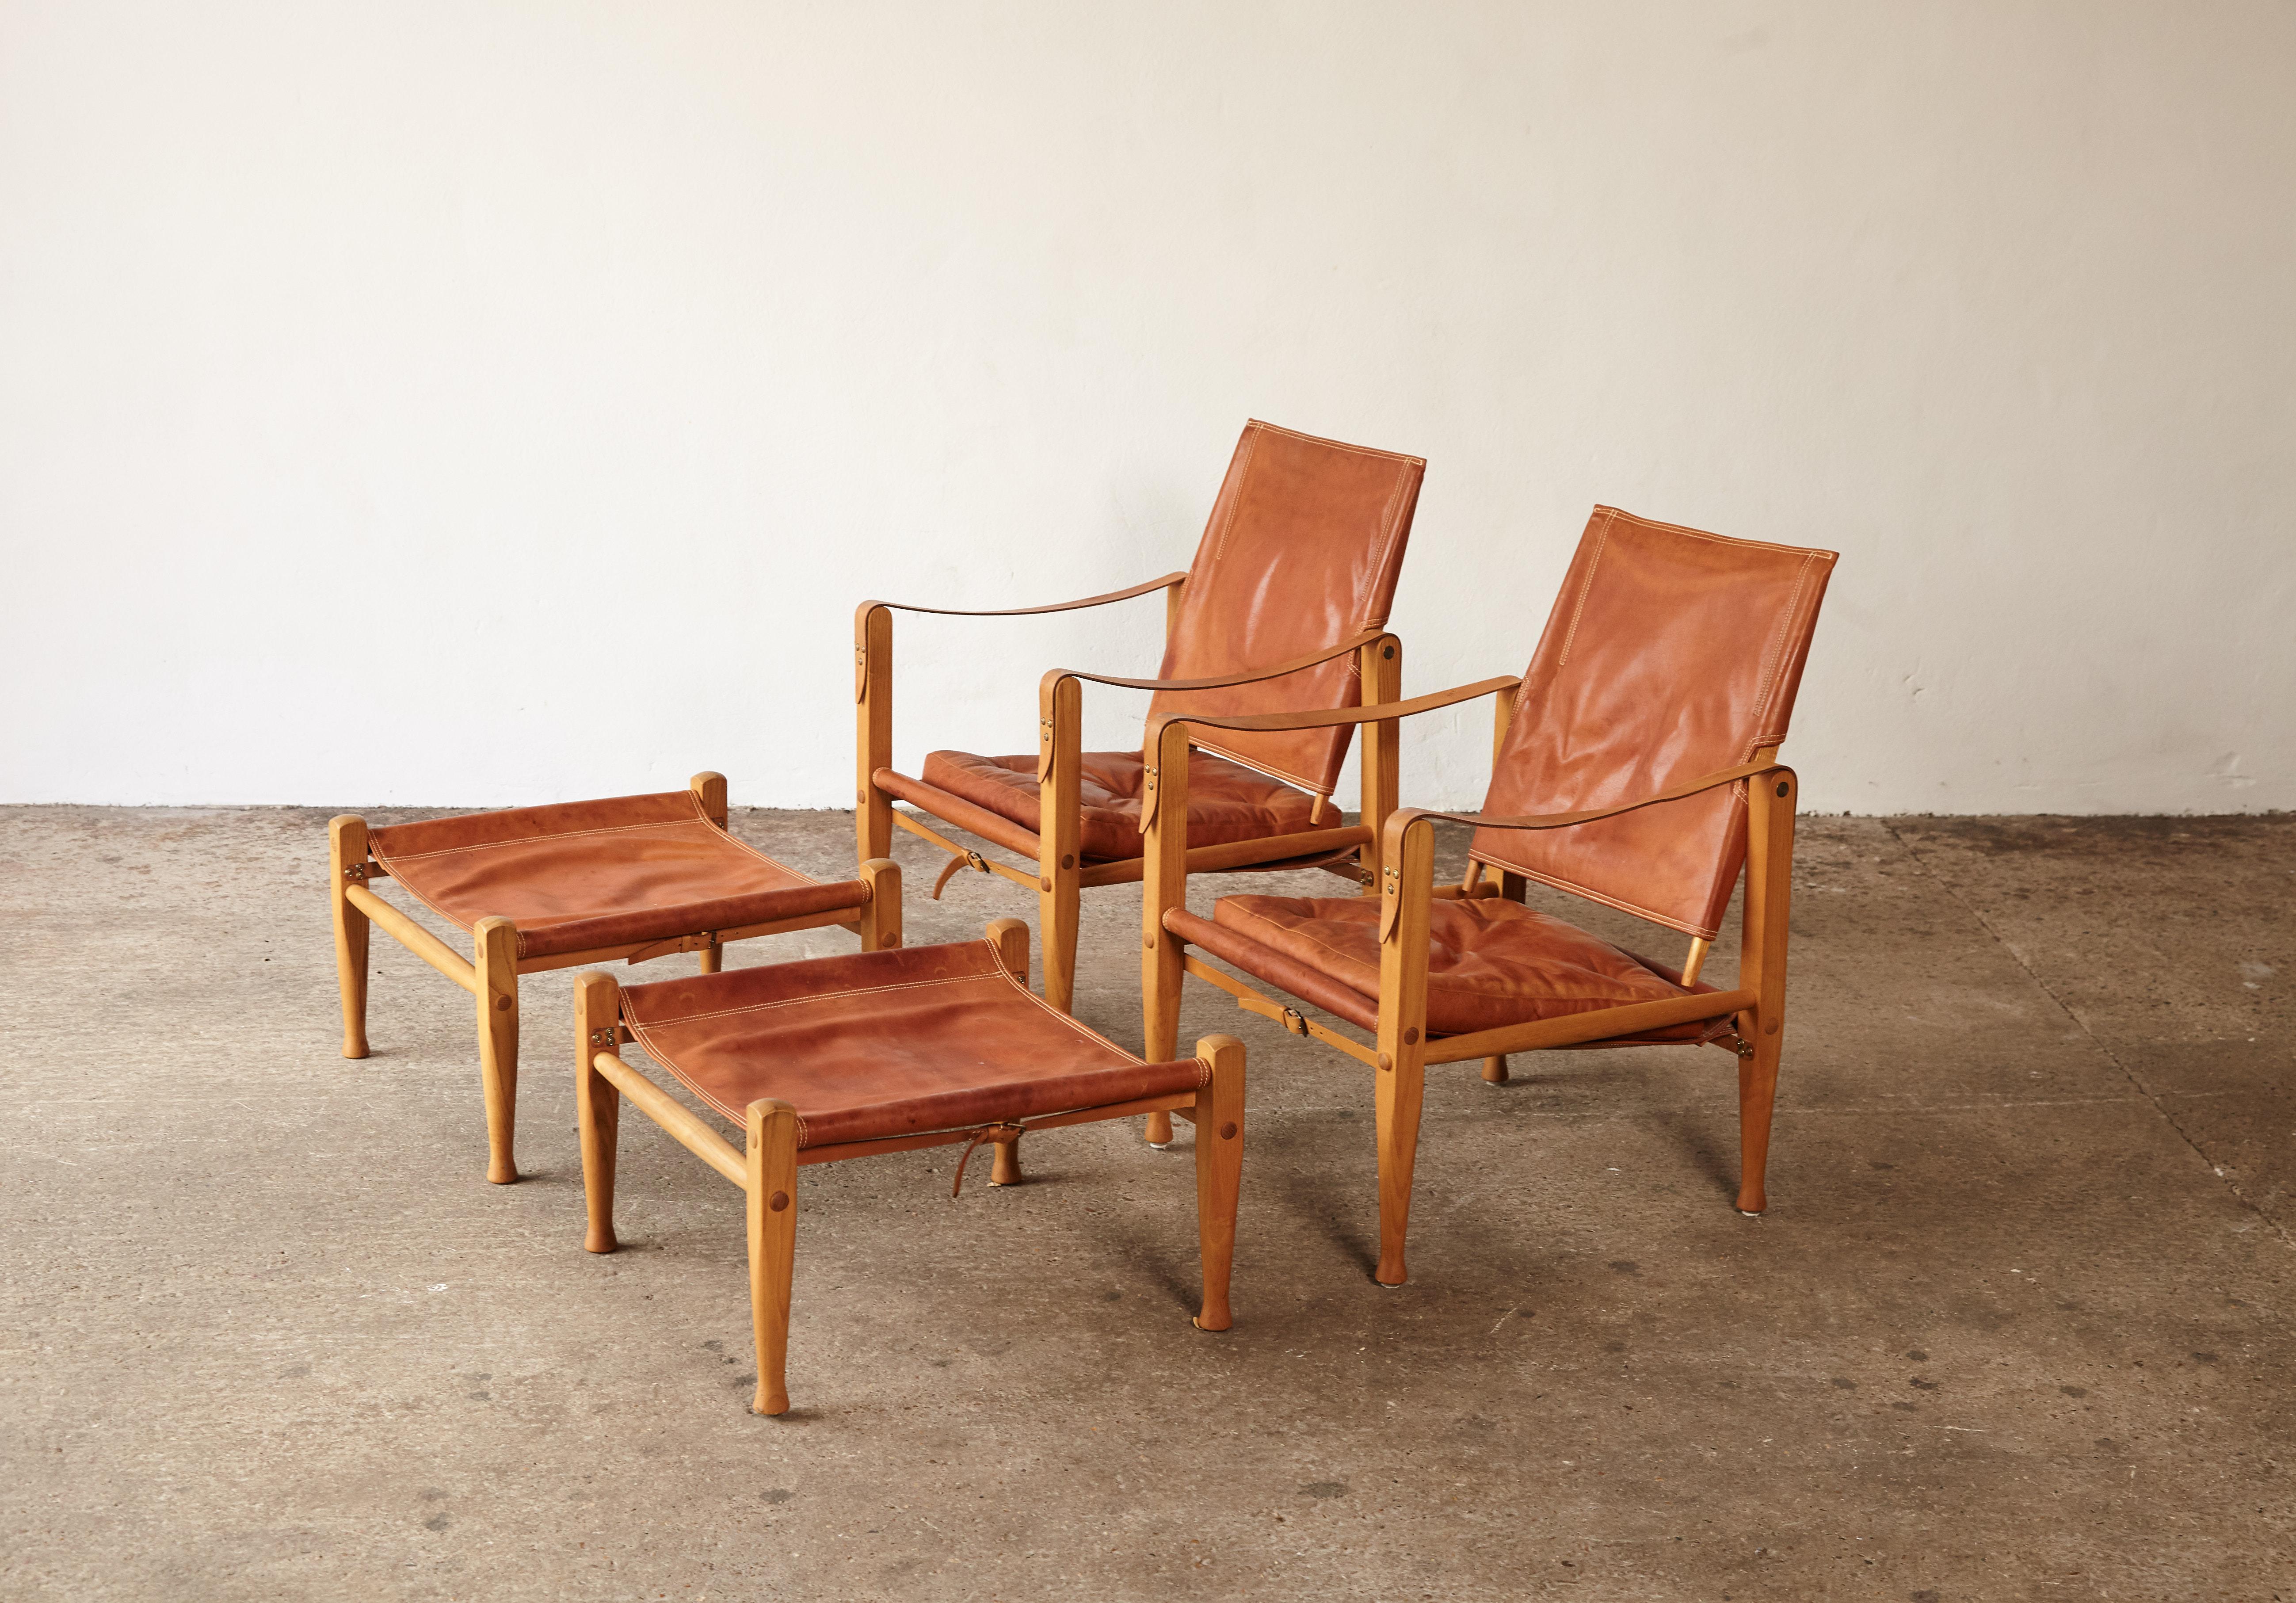 A wonderful and rare pair of Kaare Klint Safari Chairs and Ottomans, produced by Rud Rasmussen, Denmark, 1960s. Ash frames and tan/cognac leather seats. Makers label intact. Good vintage condition with some marks, stains and age related signs of use